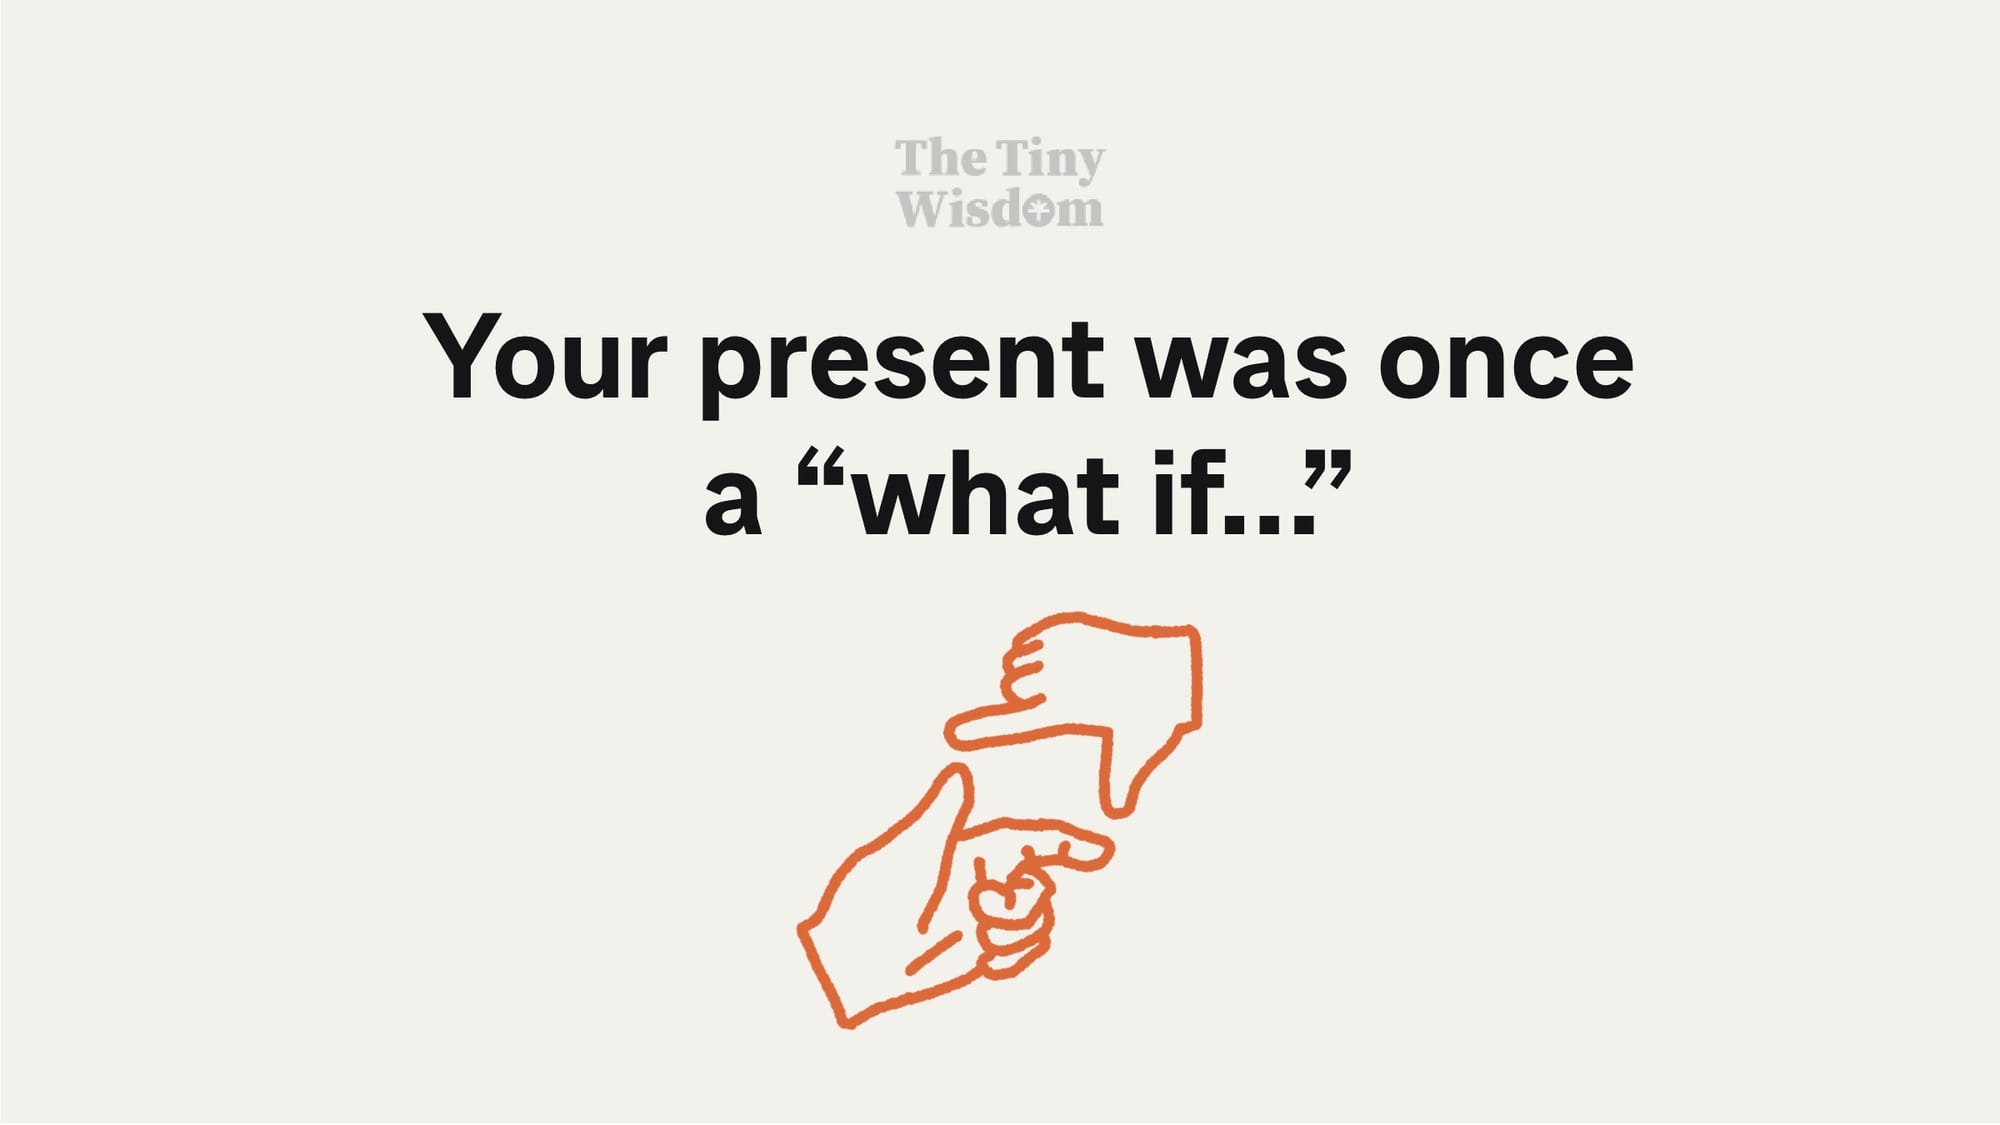 Your present was once a "what if"